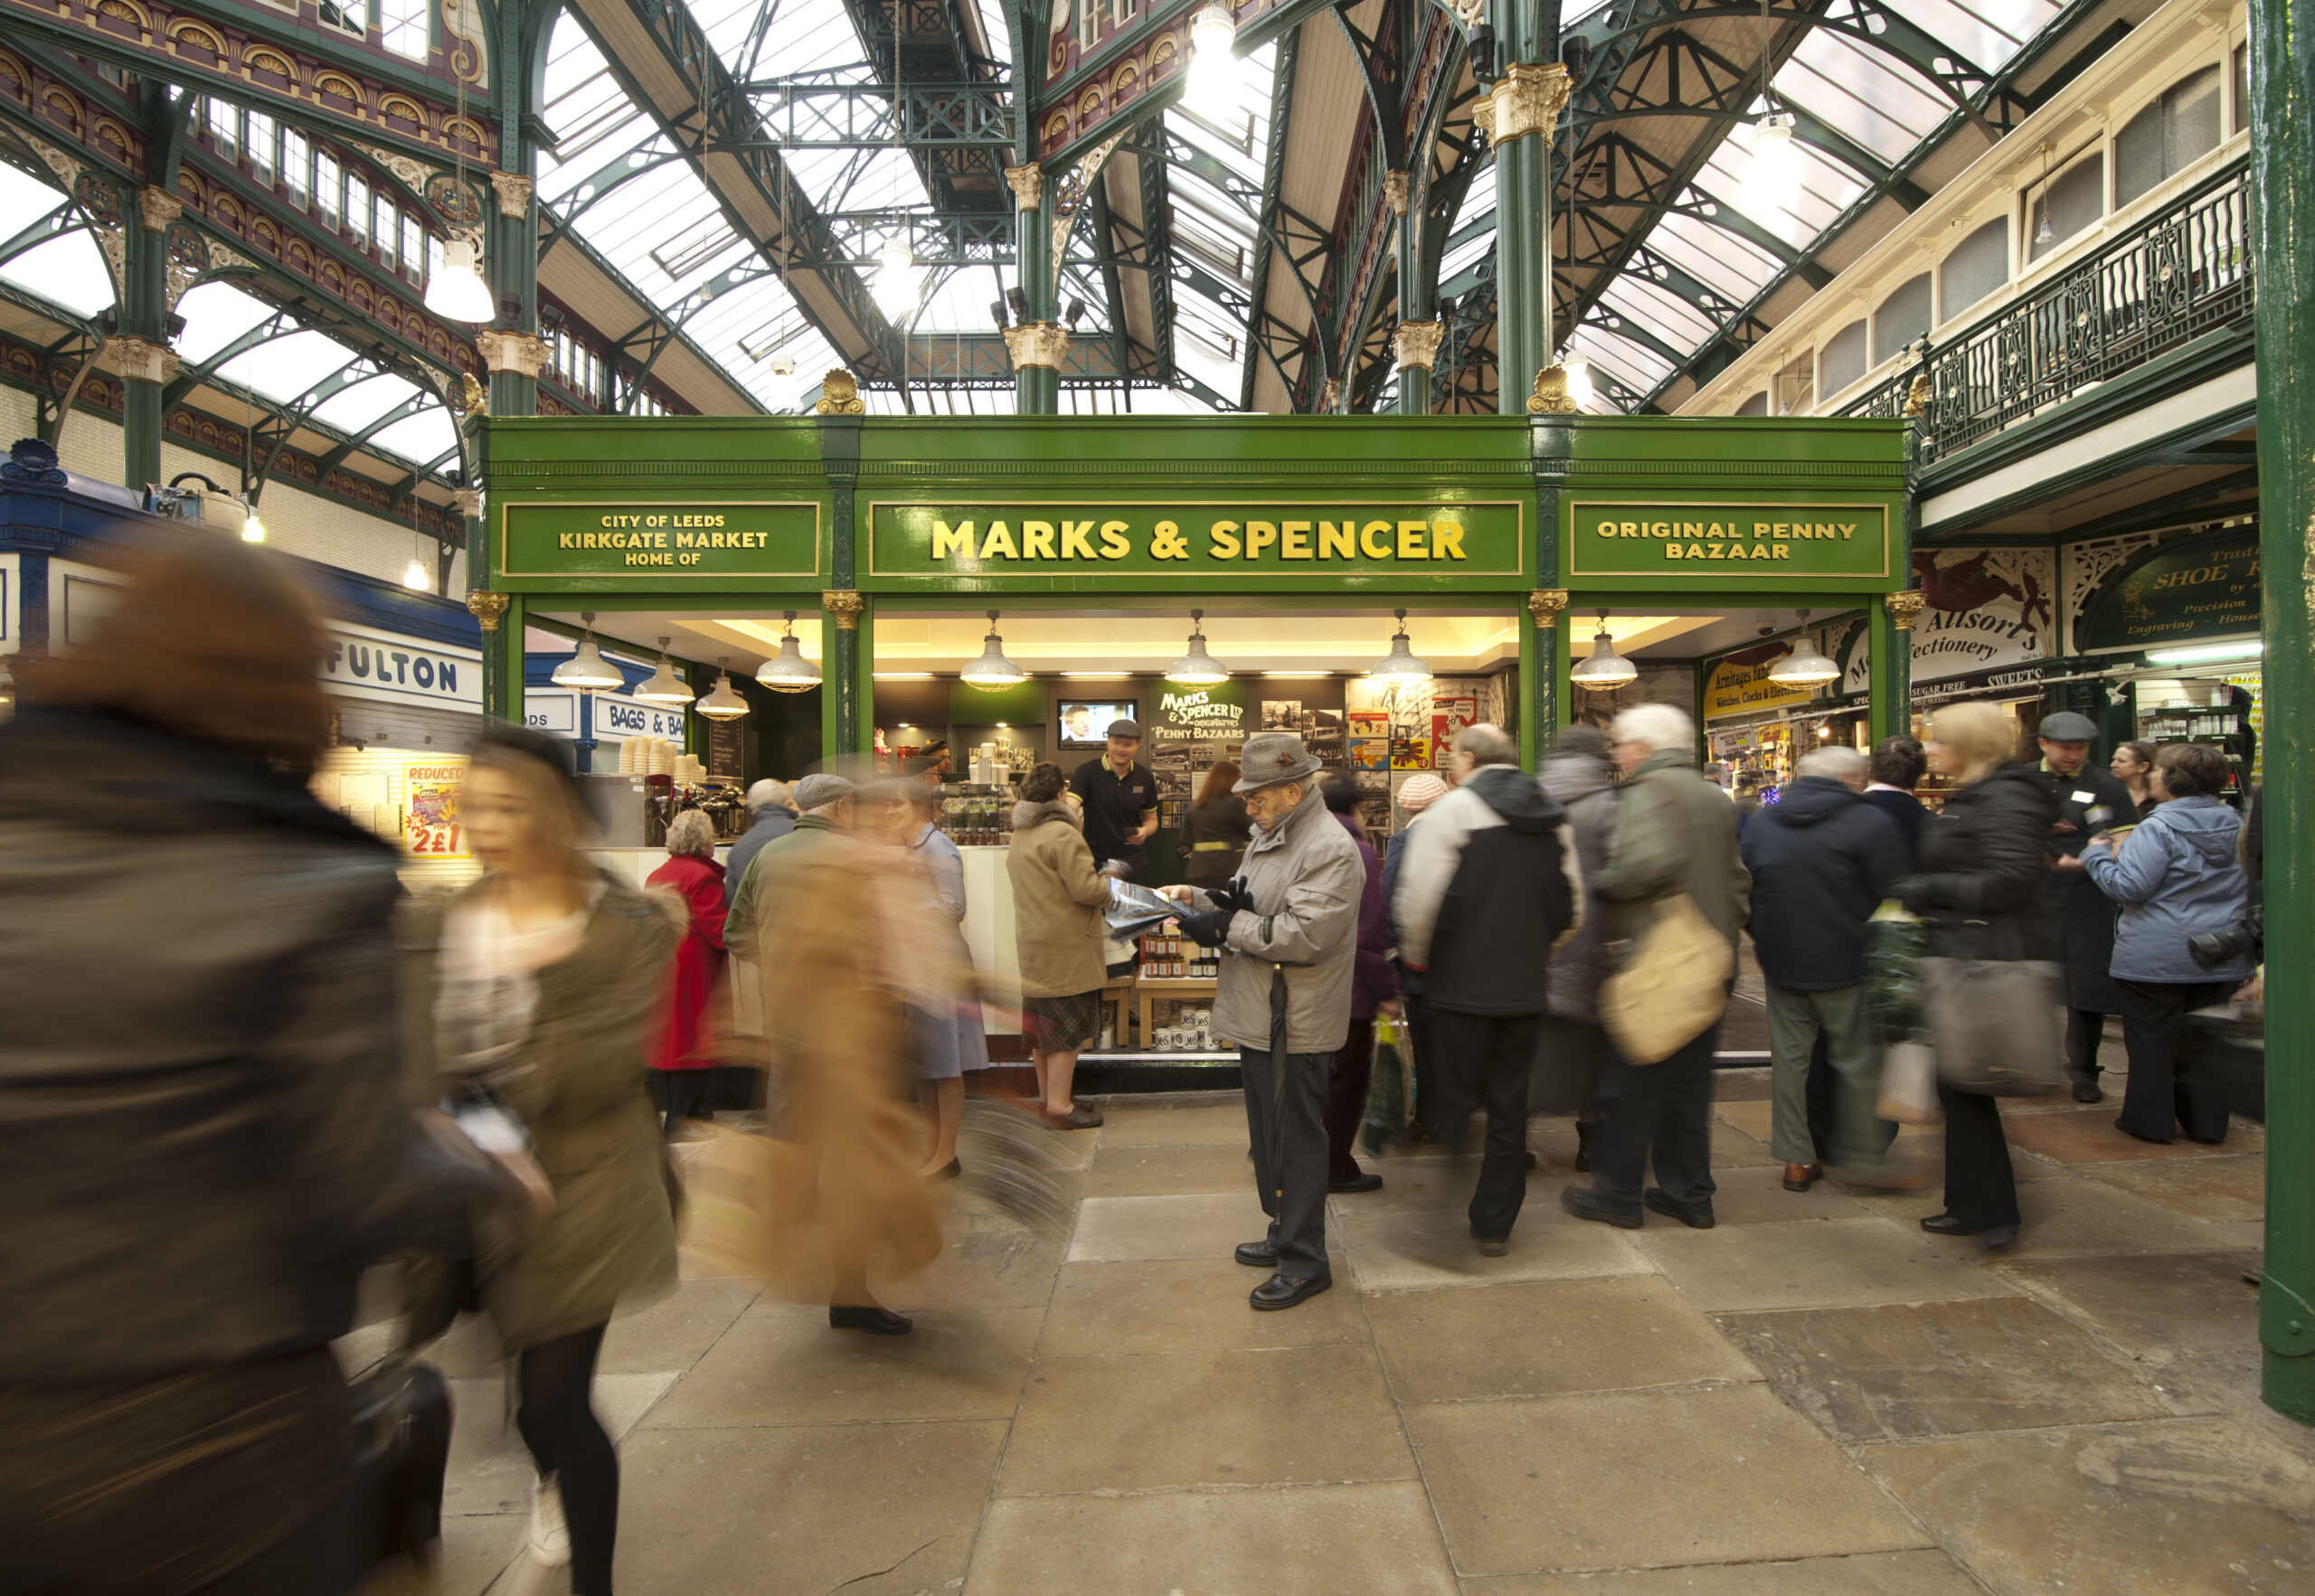 MS Kirkgate market stall - The Marks & Spencer Company Archive